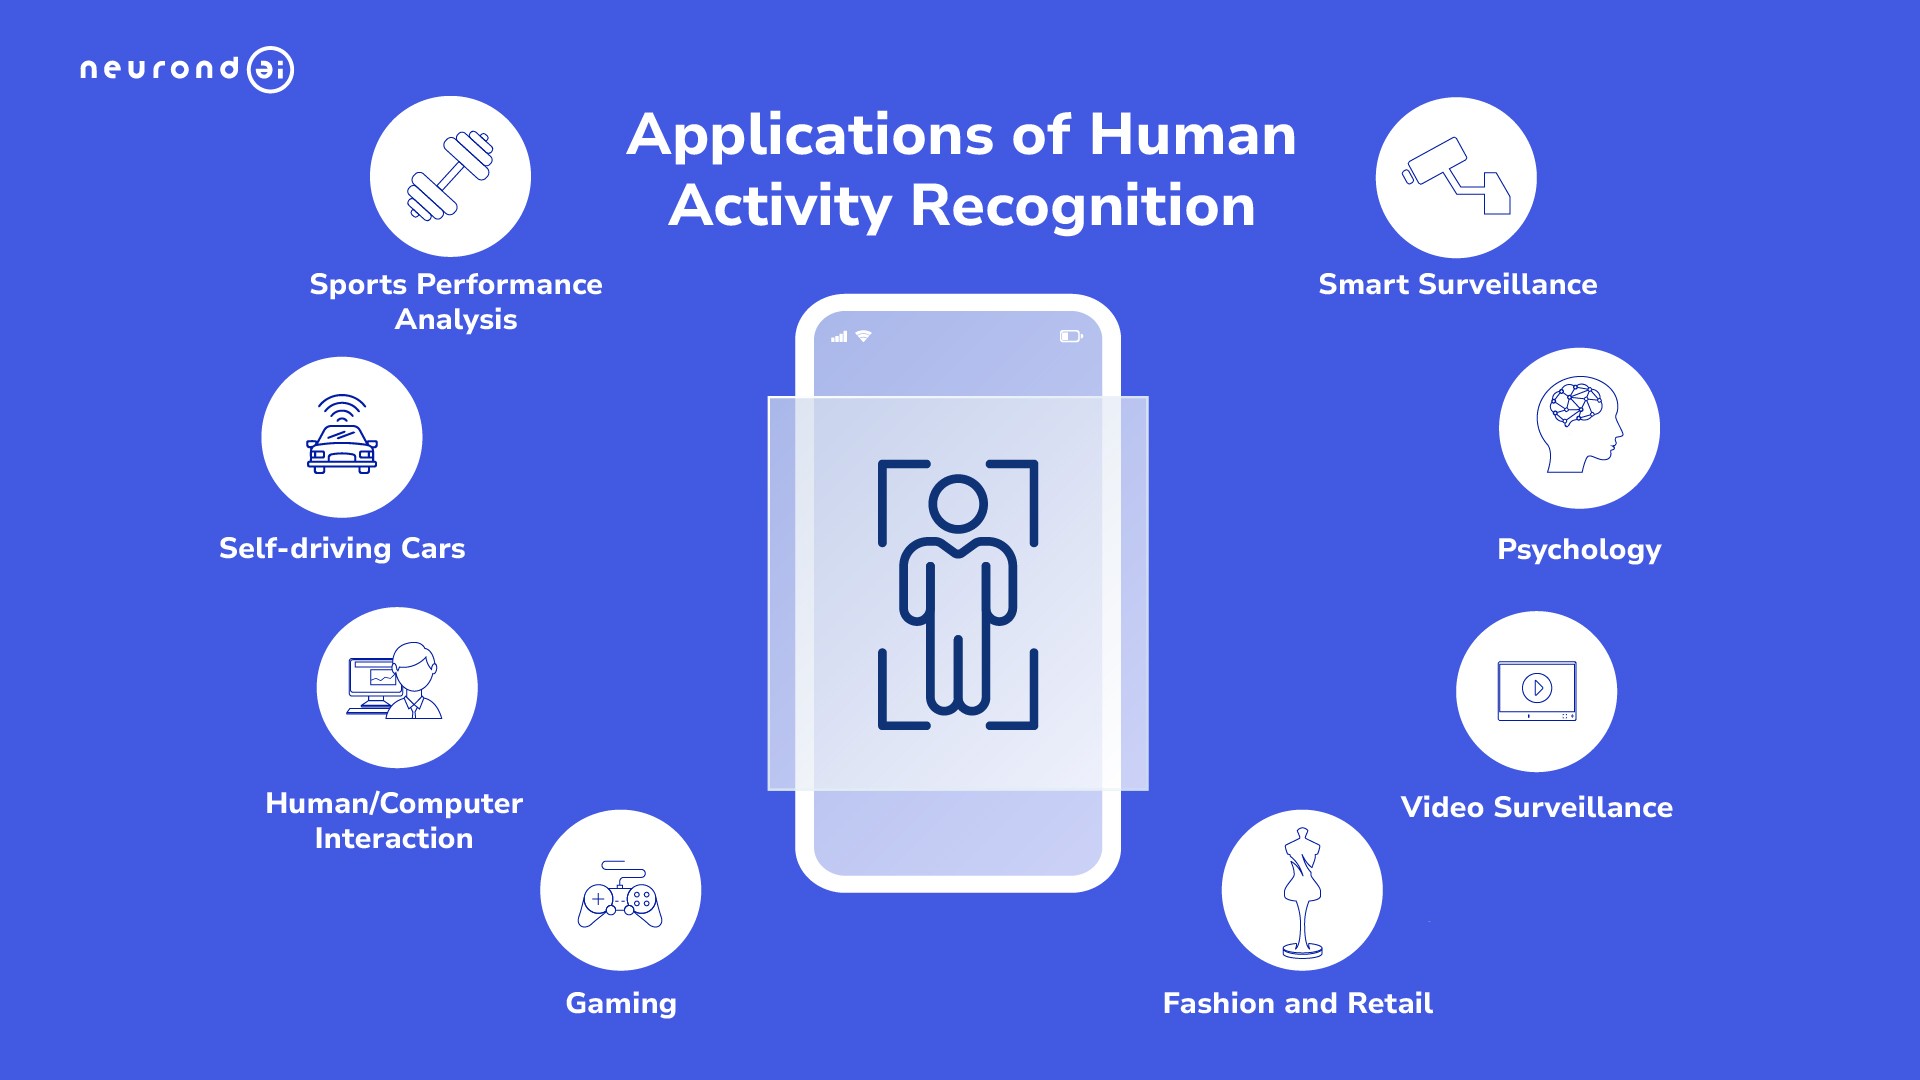 Applications of Human Activity Recognition